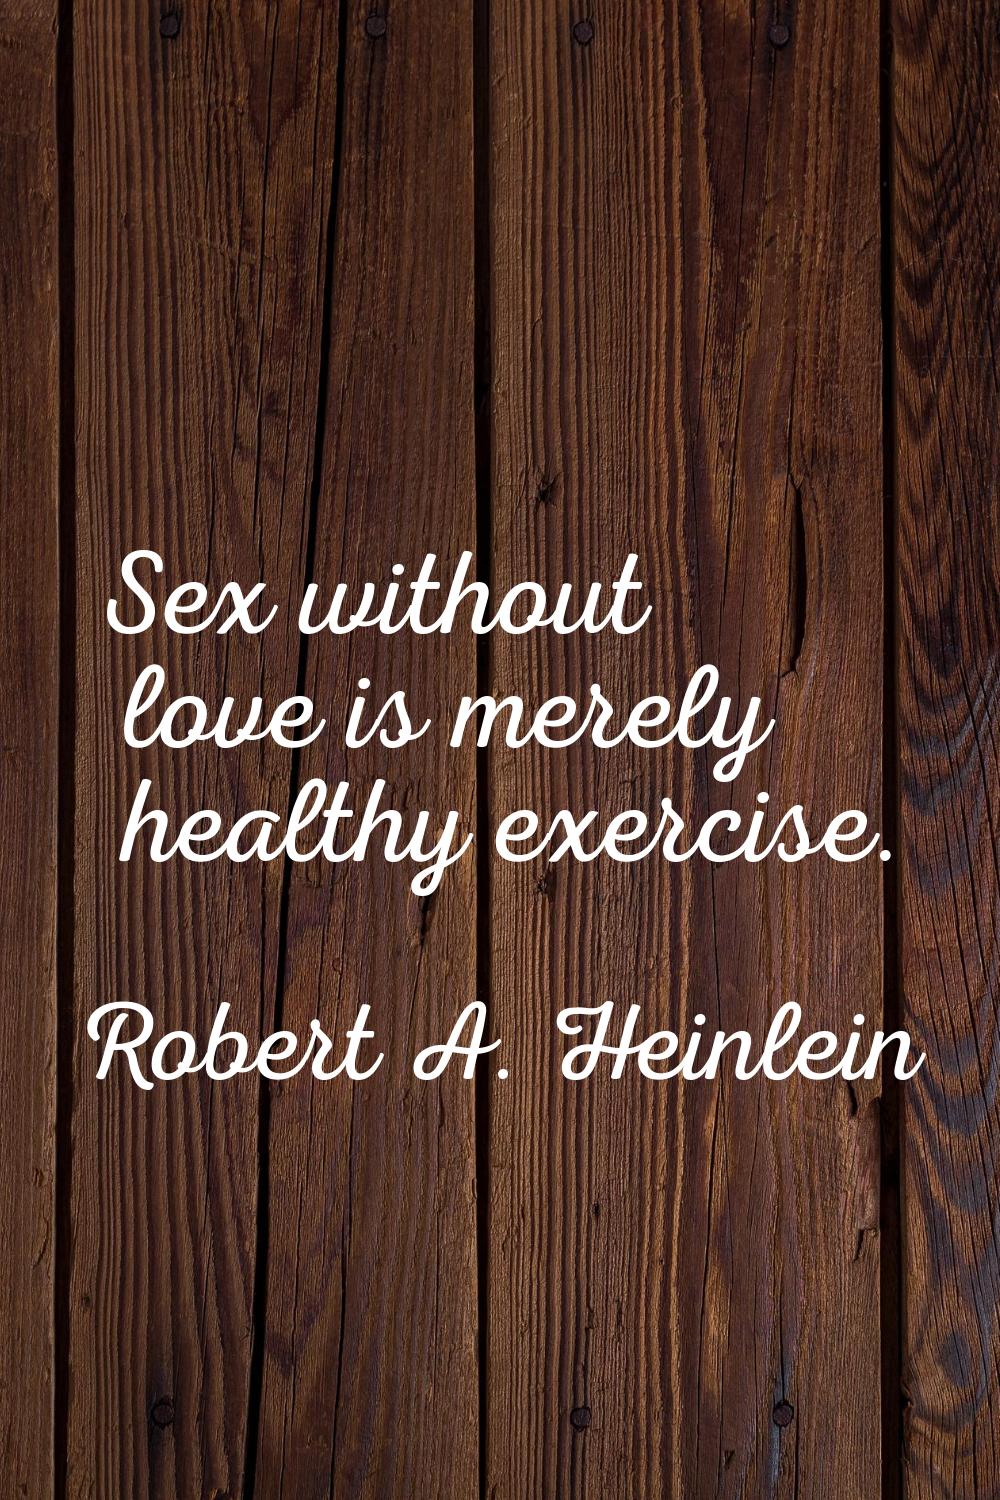 Sex without love is merely healthy exercise.